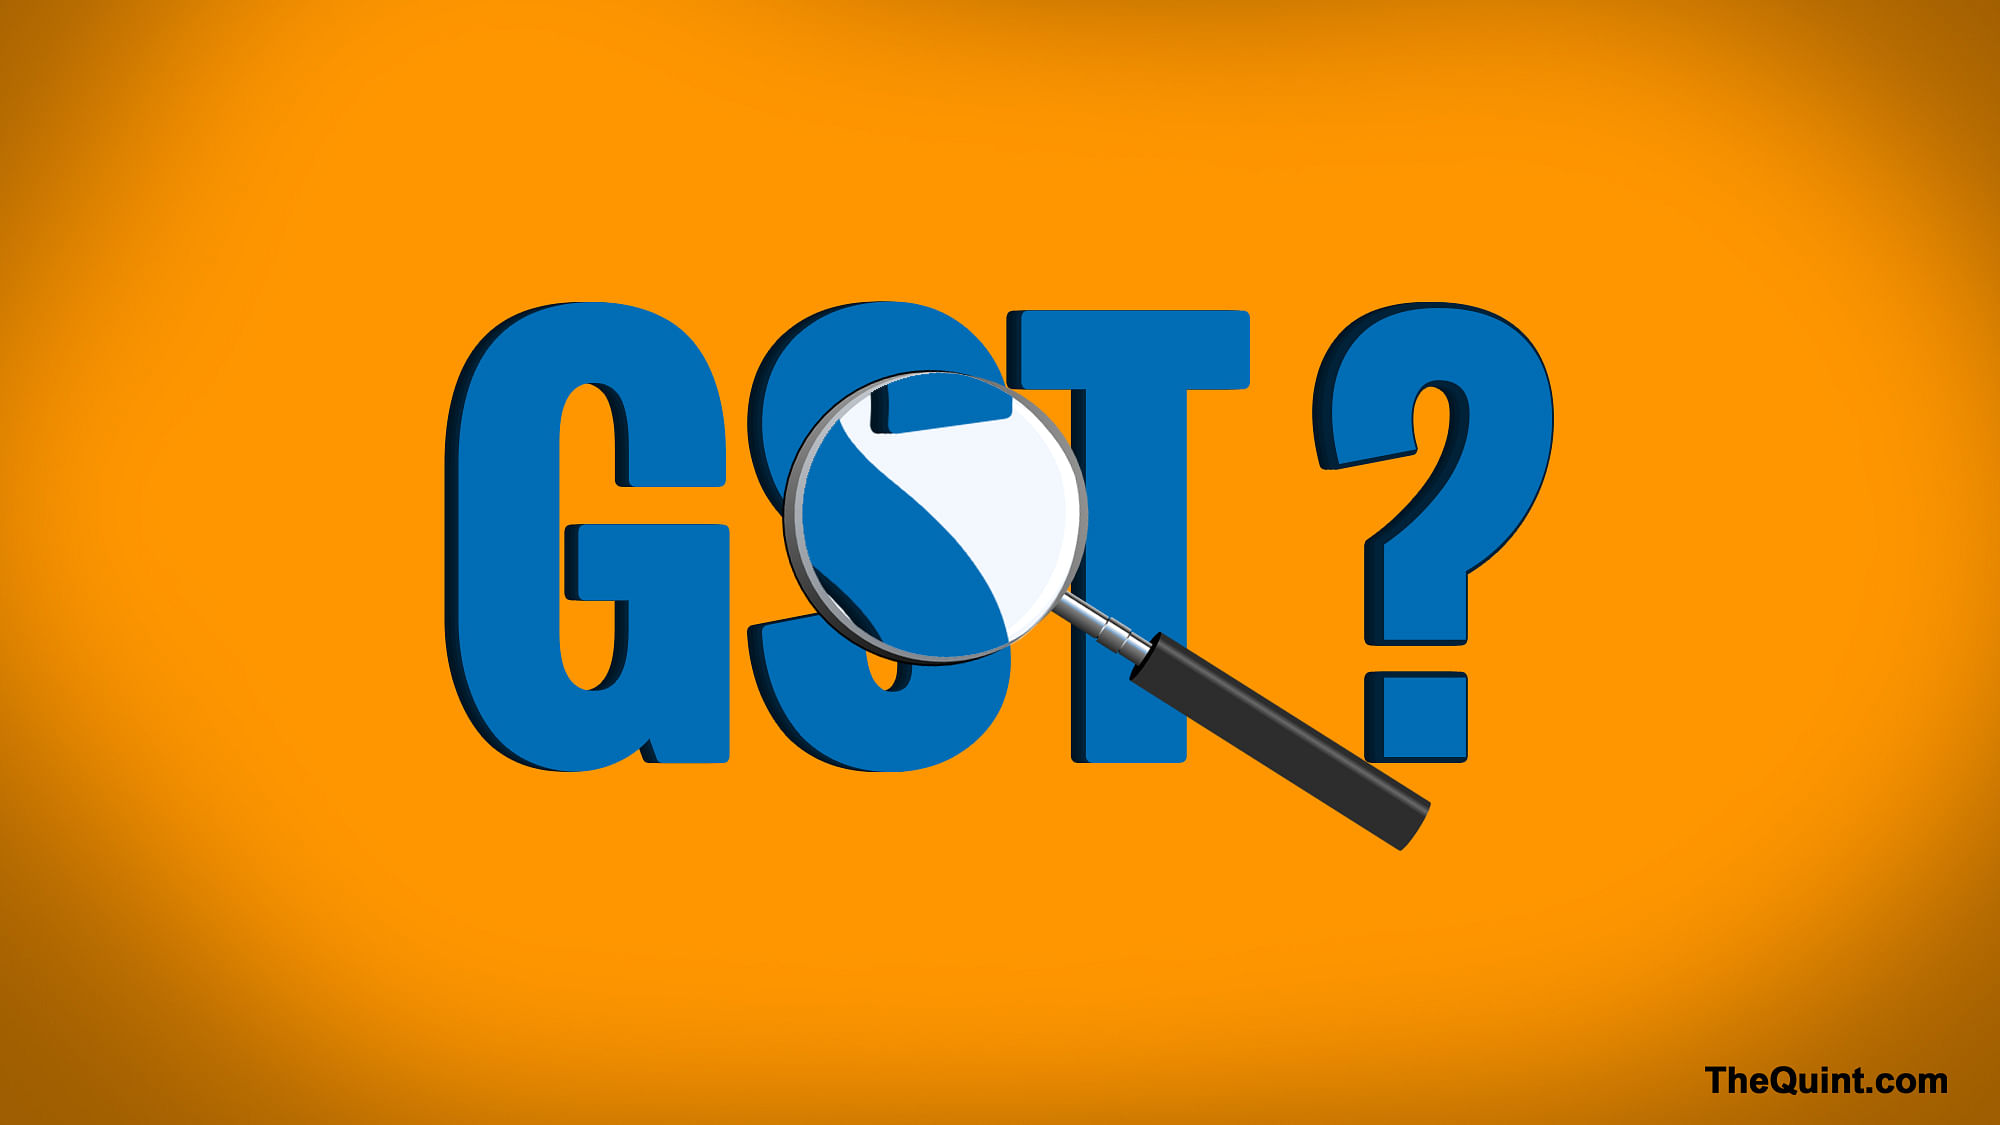 The GST bill was passed by the Rajya Sabha on Wednesday. (Photo: <b>The Quint</b>)